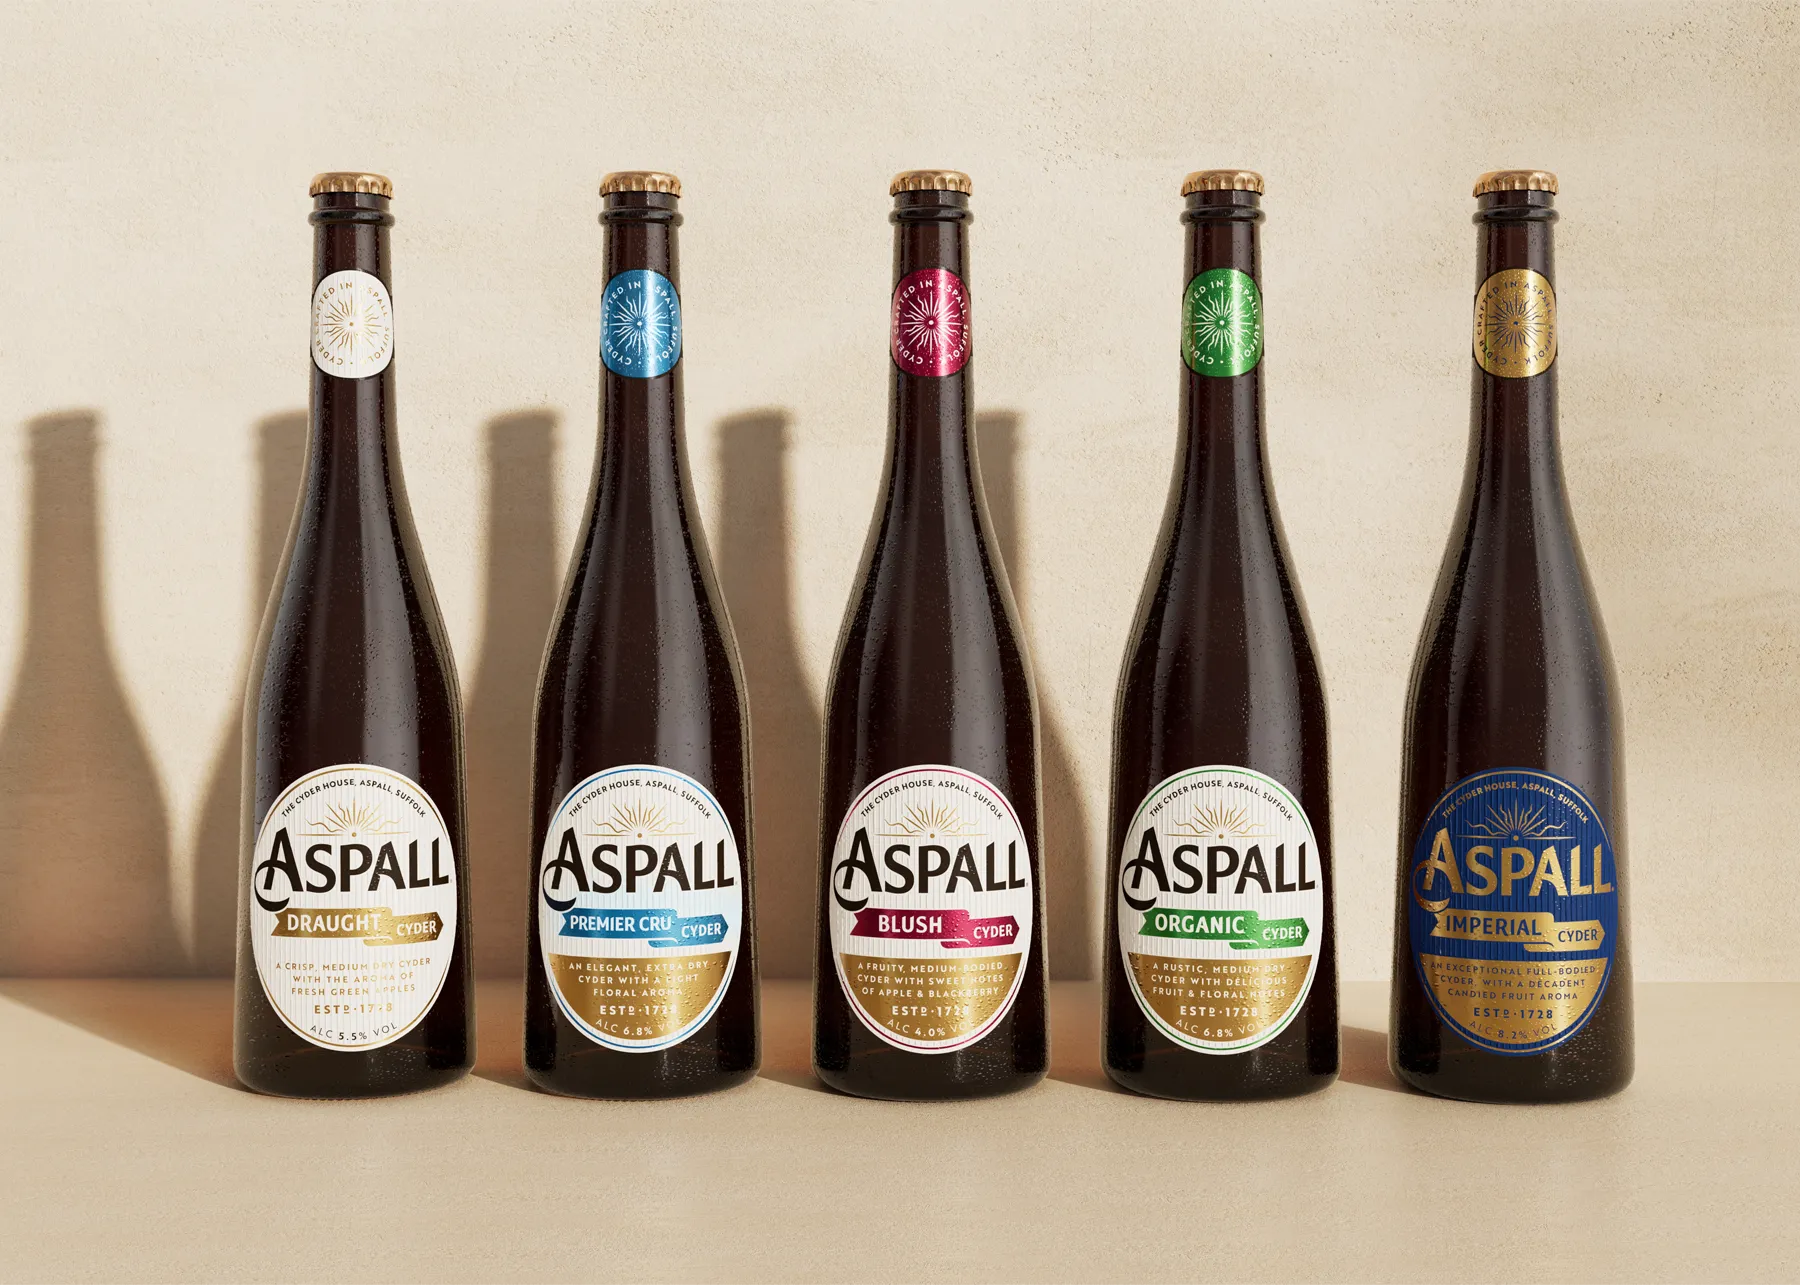 Aspall Cyder Proposes a Toast with a Colorful, Vibrant Redesign